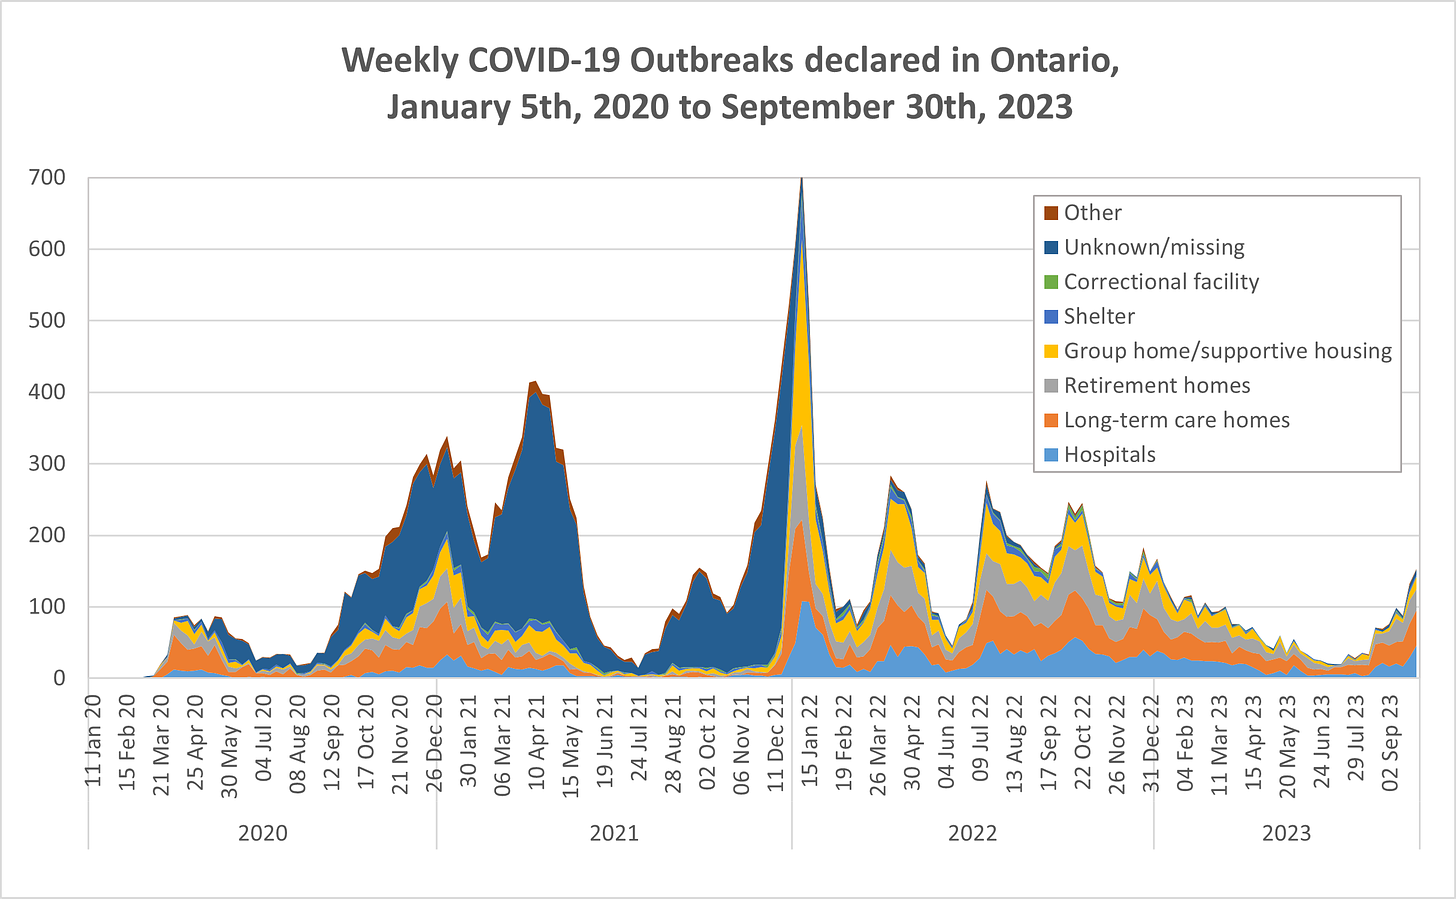 Stacked area chart showing weekly COVID-19 outbreaks declared in Ontario from January 5th, 2020 to September 20th, 2023, by setting (hospitals, long-term care homes, retirement homes, group home/ supportive housing, shelters, correctional facilities, unknown/missing, and other). Total outbreaks peak around 100 in April 2020, 300 in November 202, 400 in March 2021, 700 in January 2022, 250 in March 2022, July 2022 and September 2022, and decreasing from around 20 in July 2023 to 150 by late September 2023.